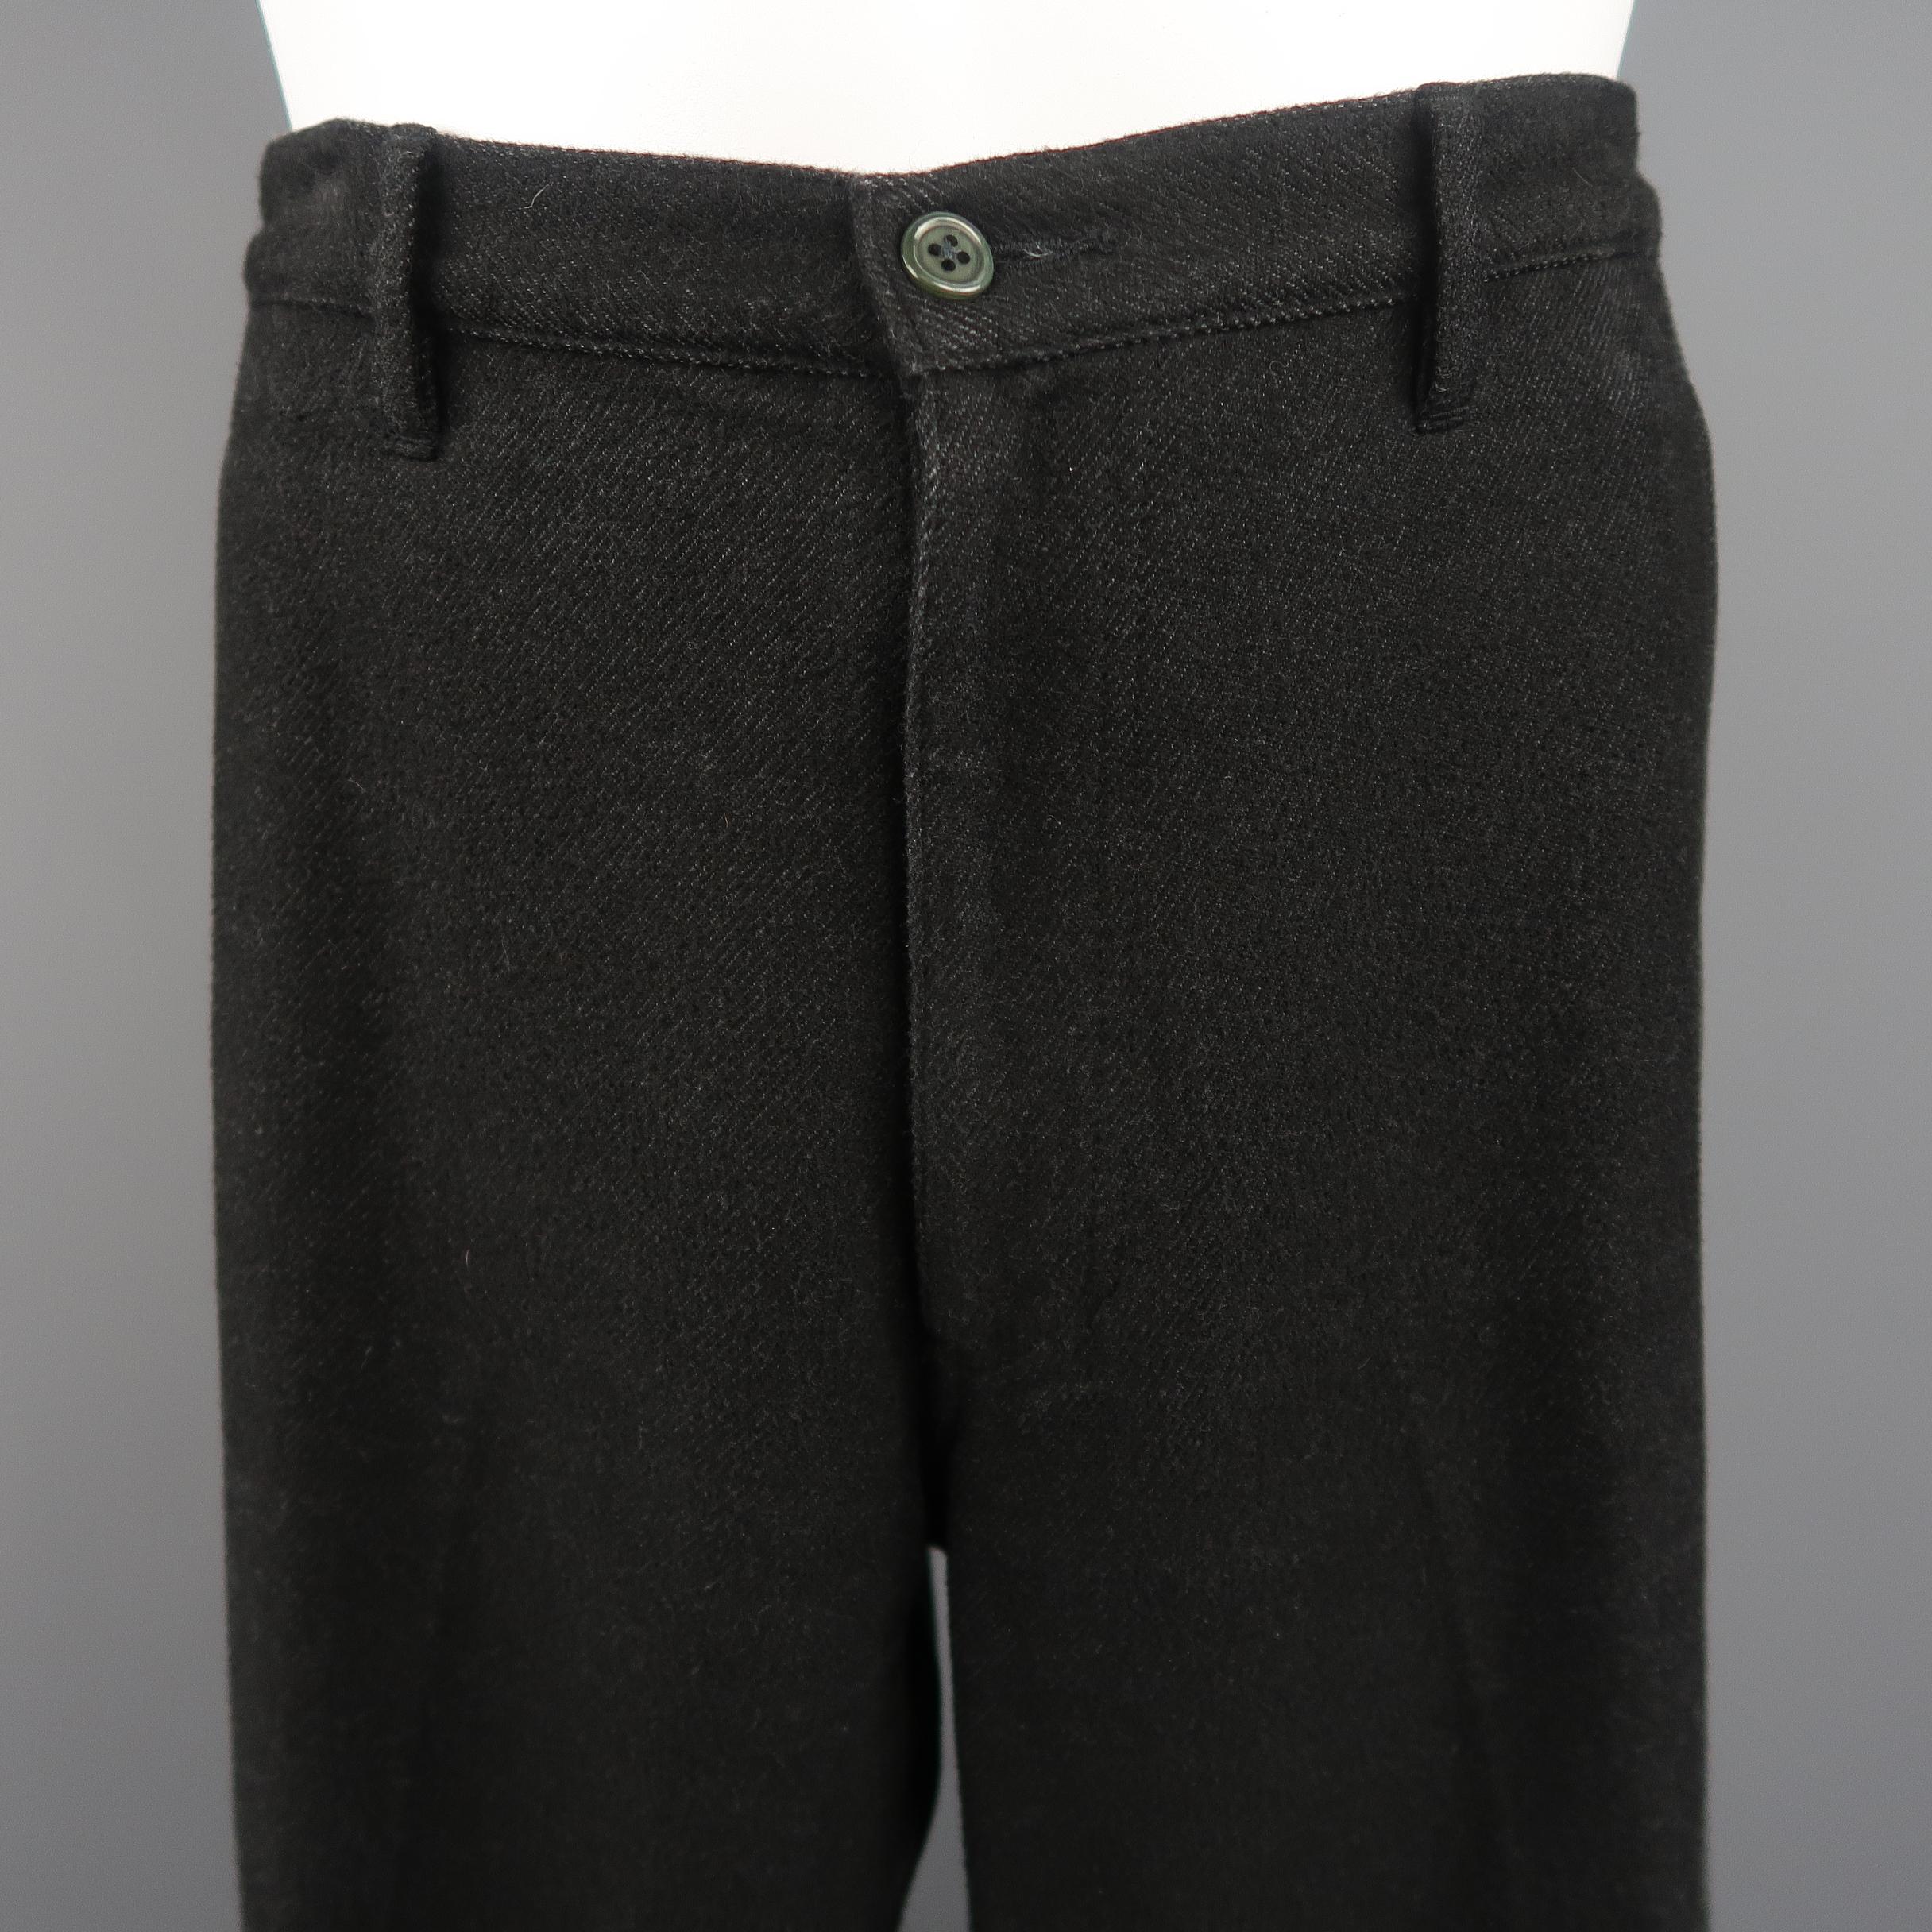 COMME des GARCONS HOMME PLUS trousers come in a soft cotton blend twill with a subtle washed effect, zip fly, and green buttons. Circa 2004. Made in Japan.
 
Good Pre-Owned Condition.
Marked: L
 
Measurements:
 
Waist: 34 in.
Rise: 11 in.
Inseam: 34